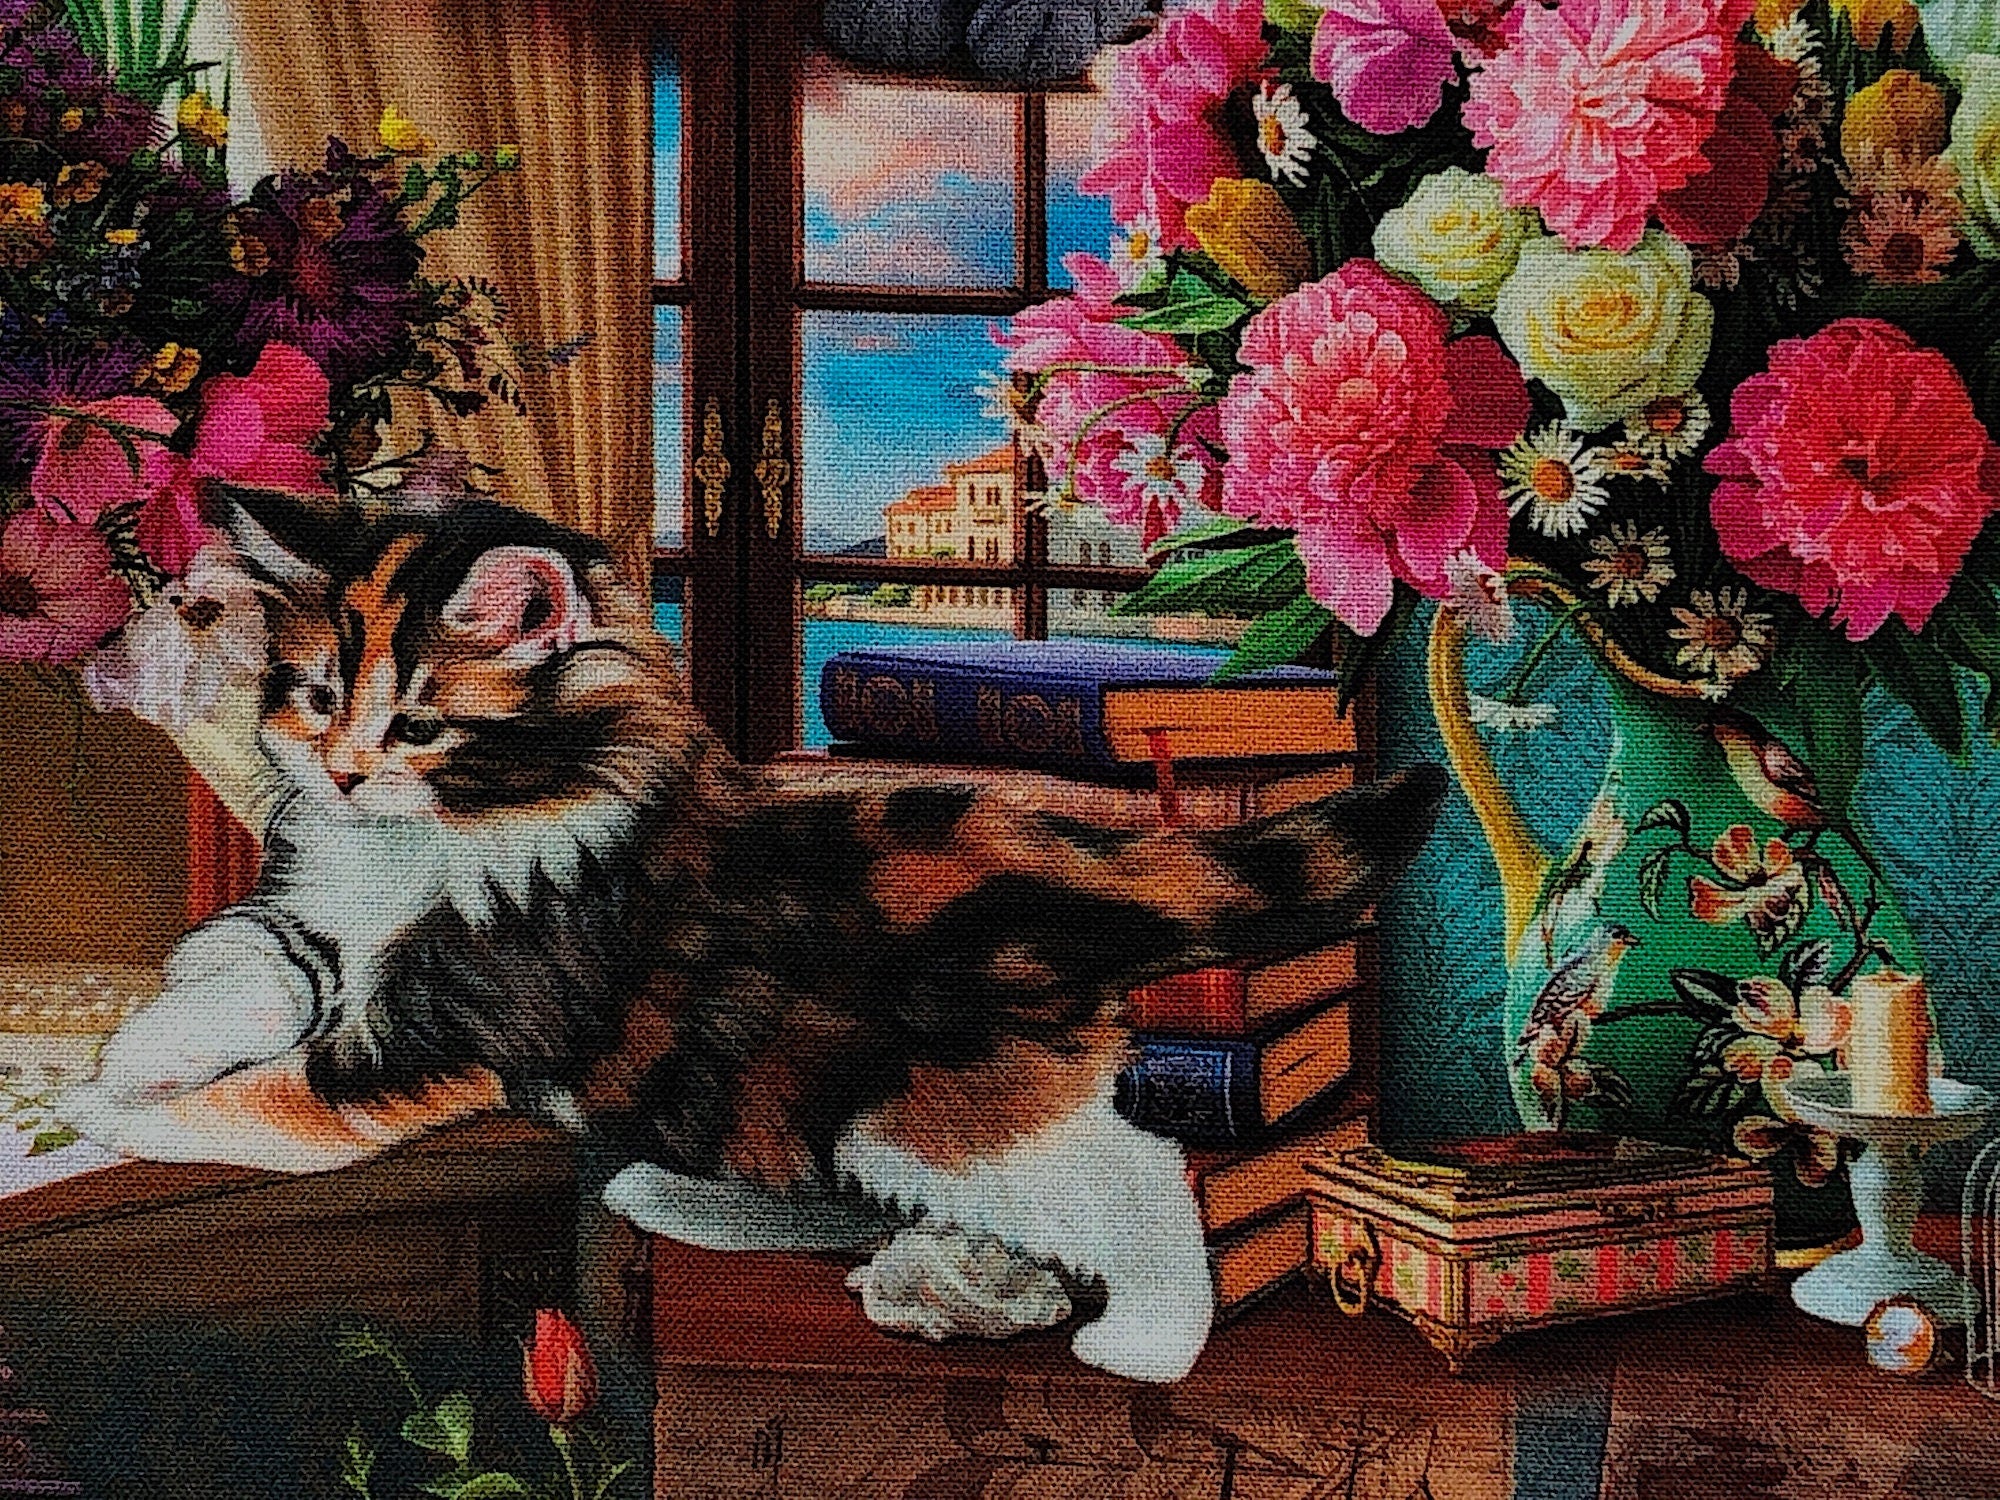 Close up of a calico cat by a vase of flowers.